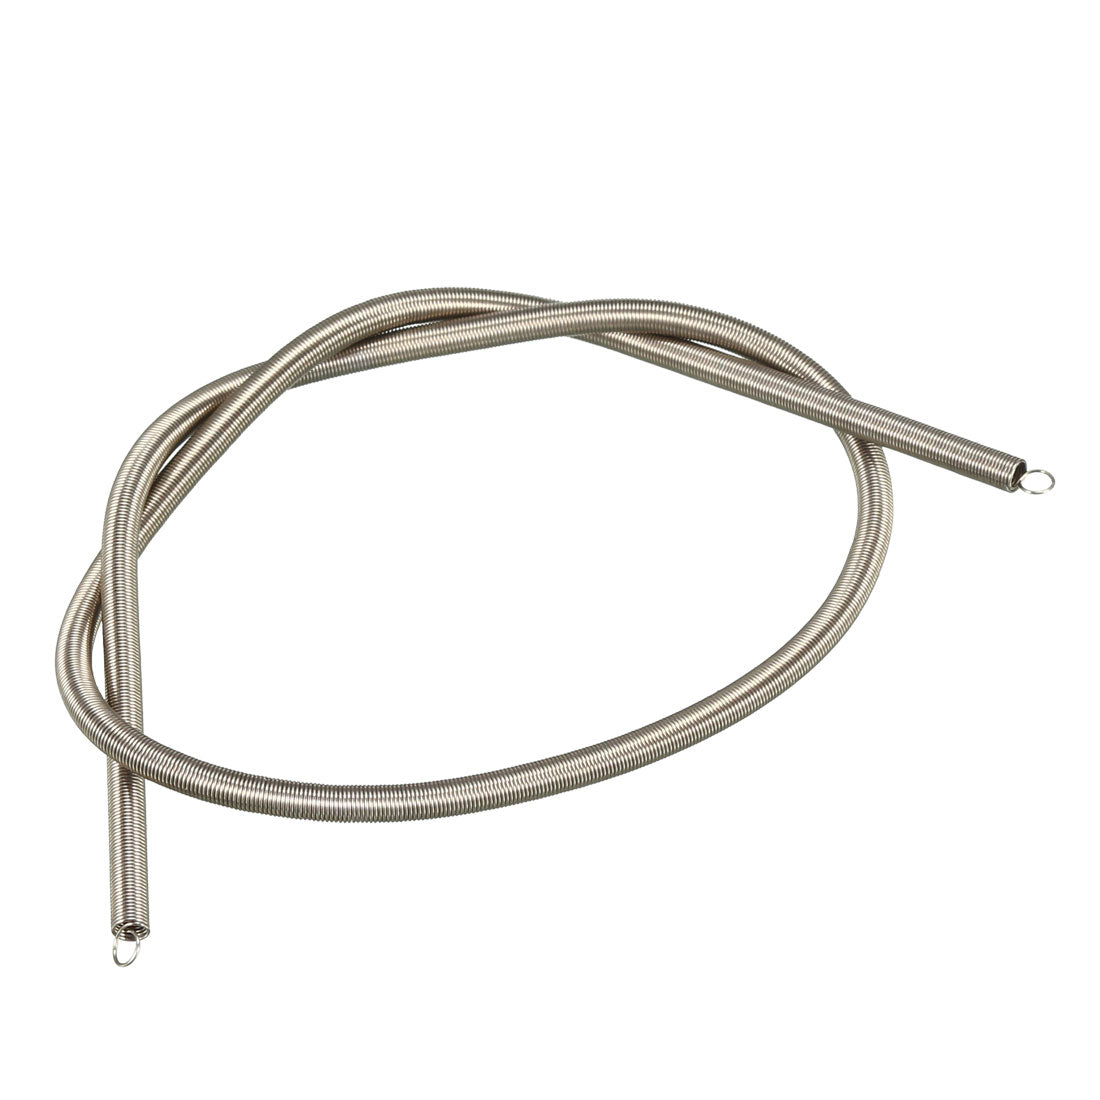 uxcell Uxcell Extended Tension Spring Wire Diameter 0.02", OD 0.12", Free Length 11.81"